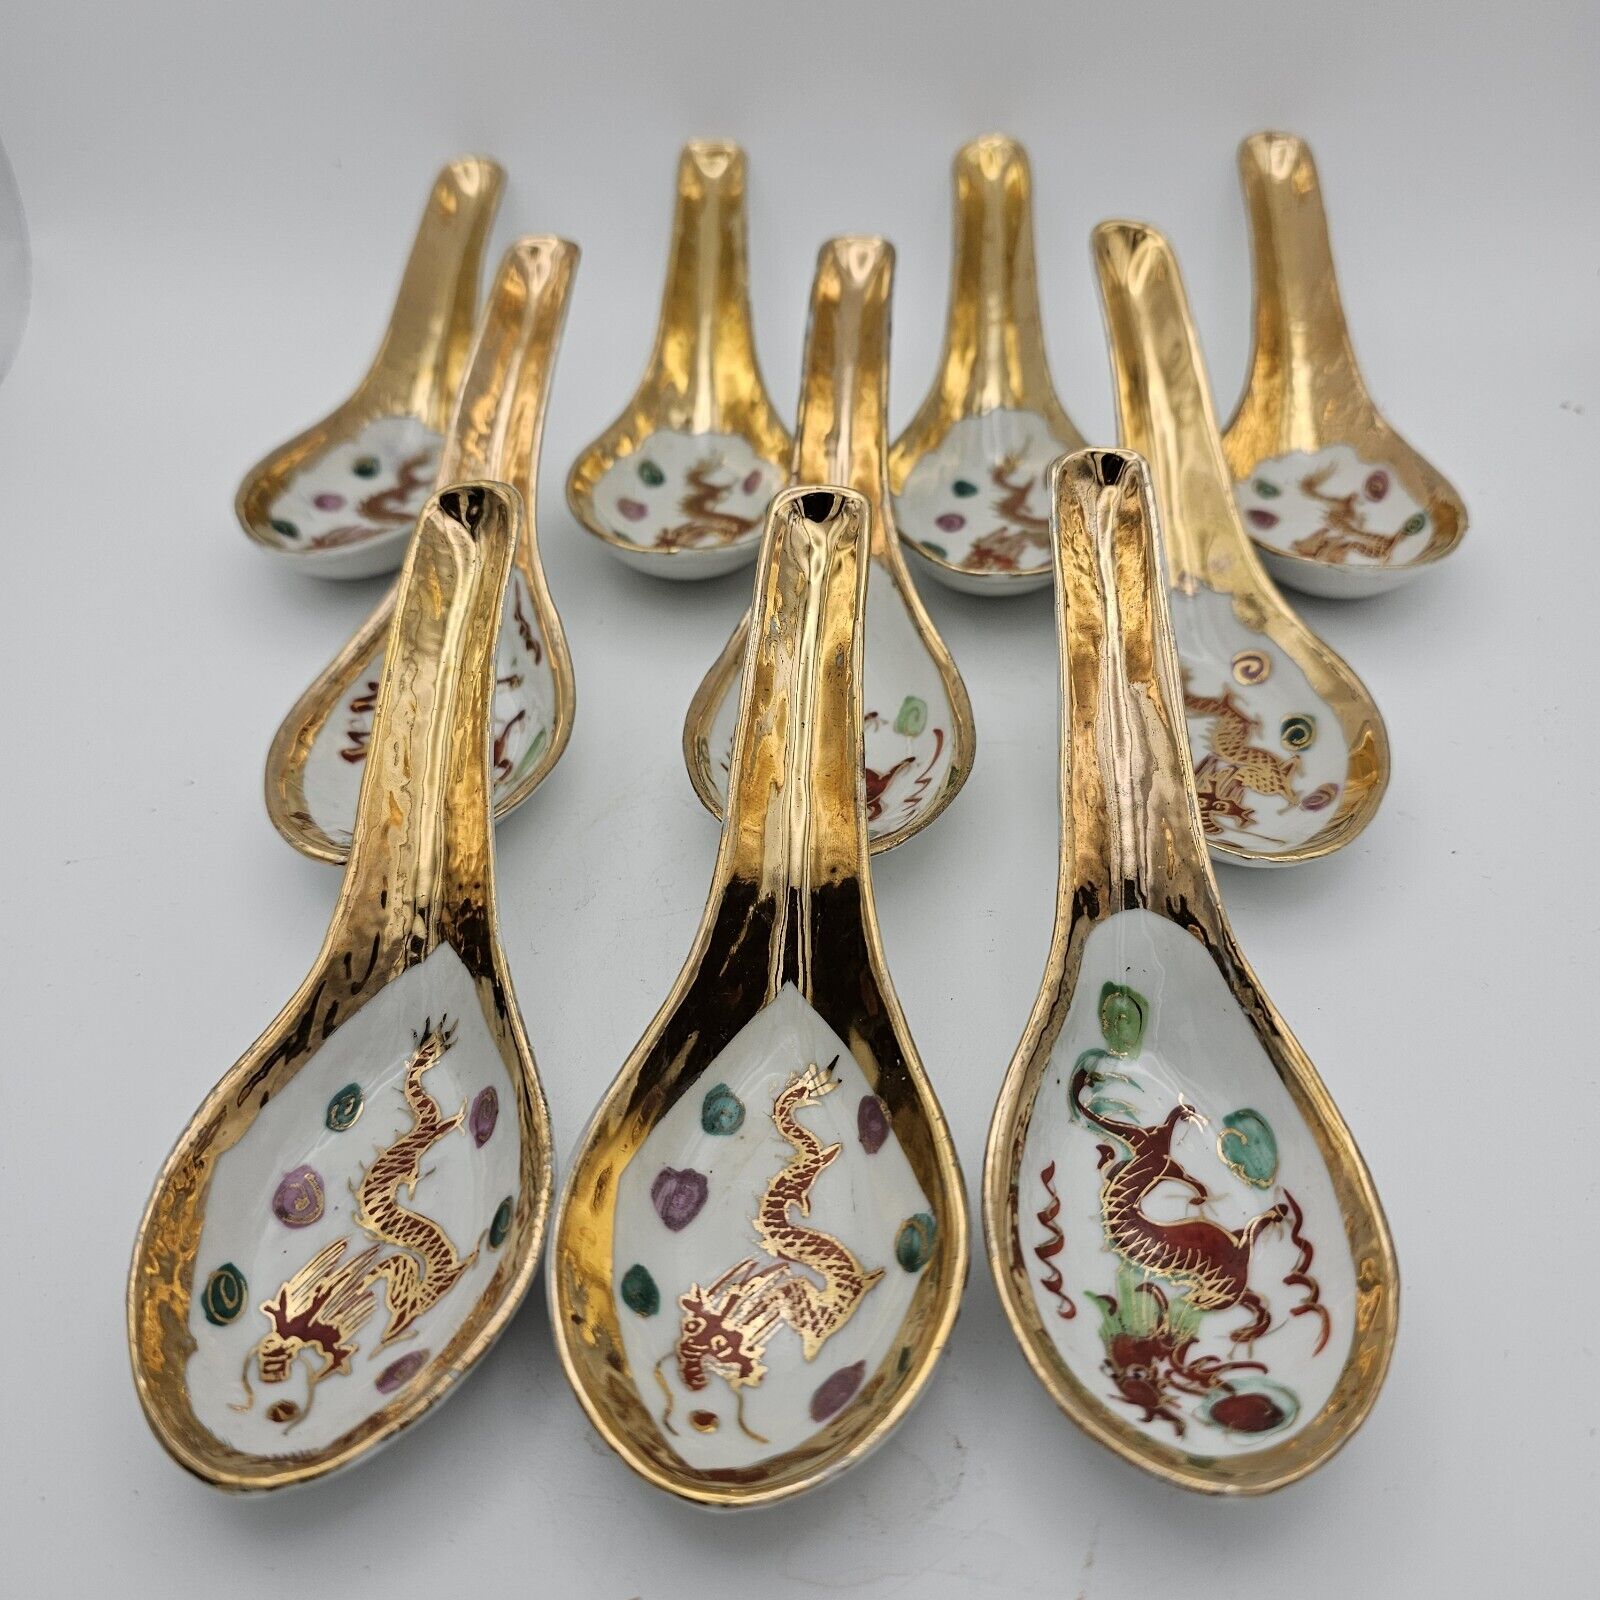 Set Of 10 Dragon Design Rice Ladle/Spoon Each Hand Painted Unused But Pre-owned